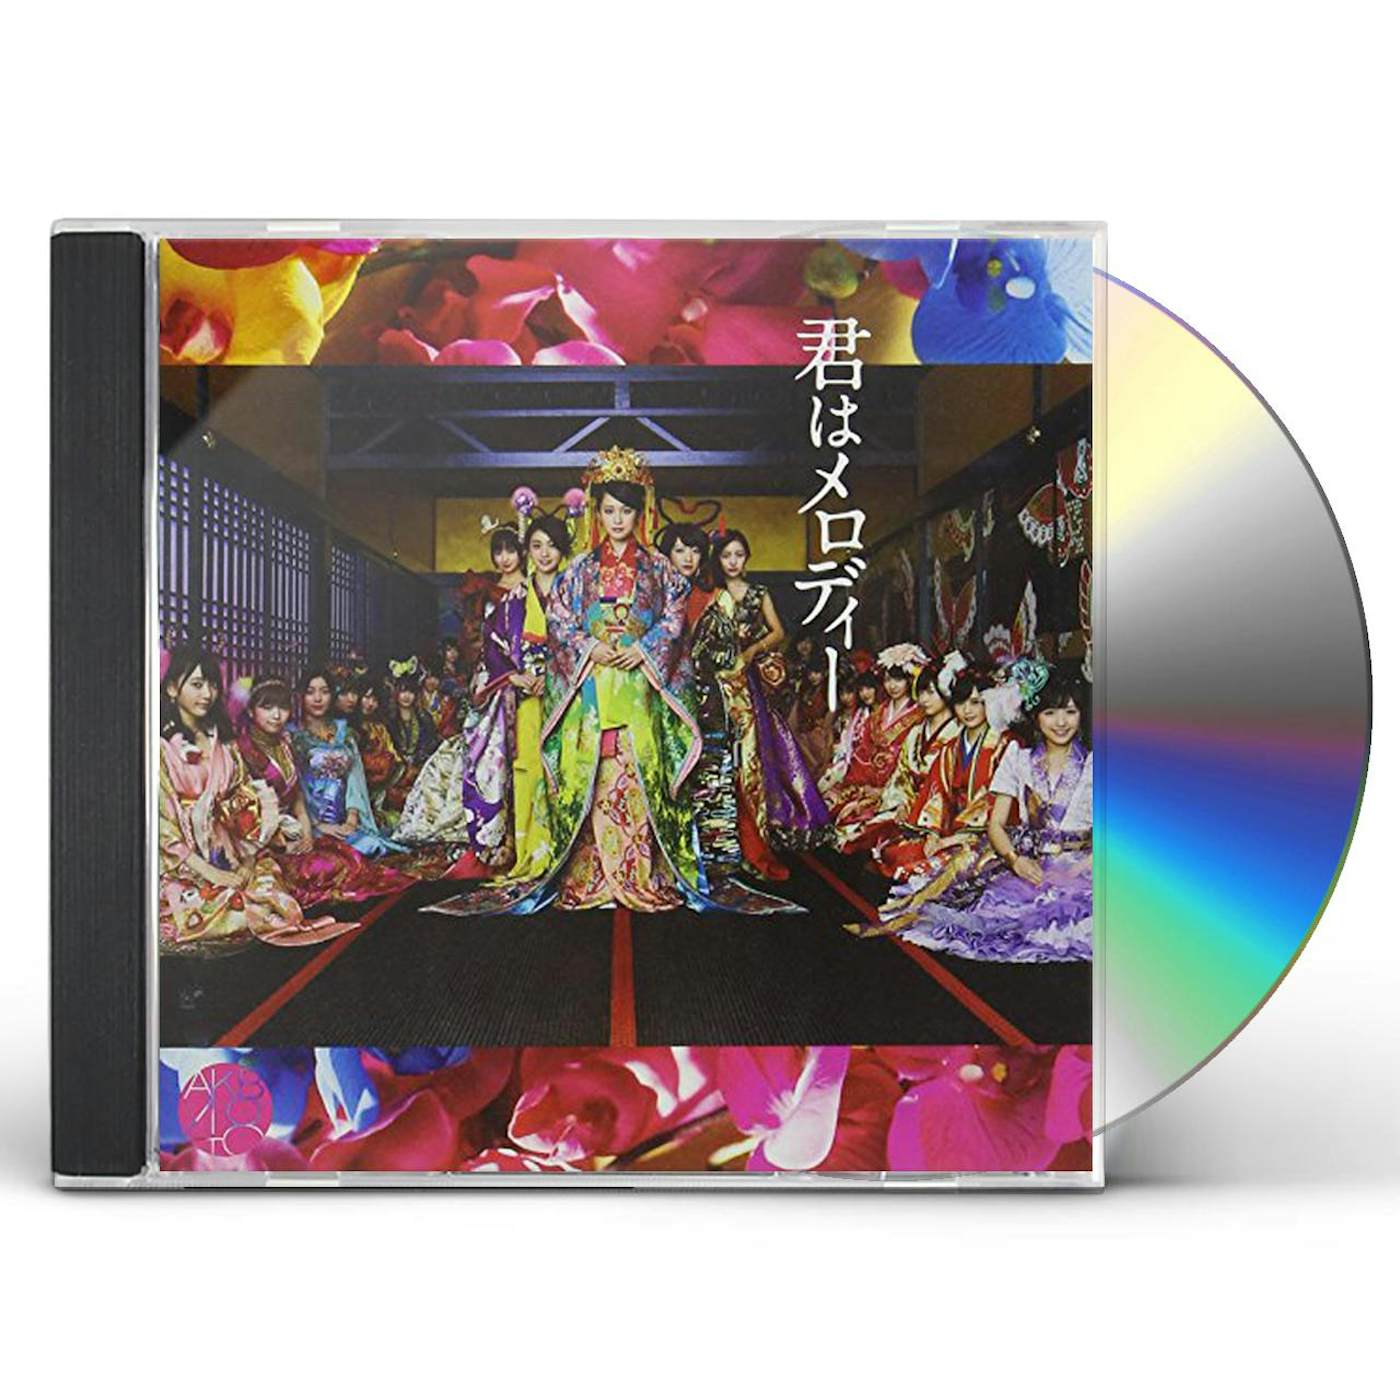 AKB48 KIMI HA MELODY: DELUXE VERSION A CD